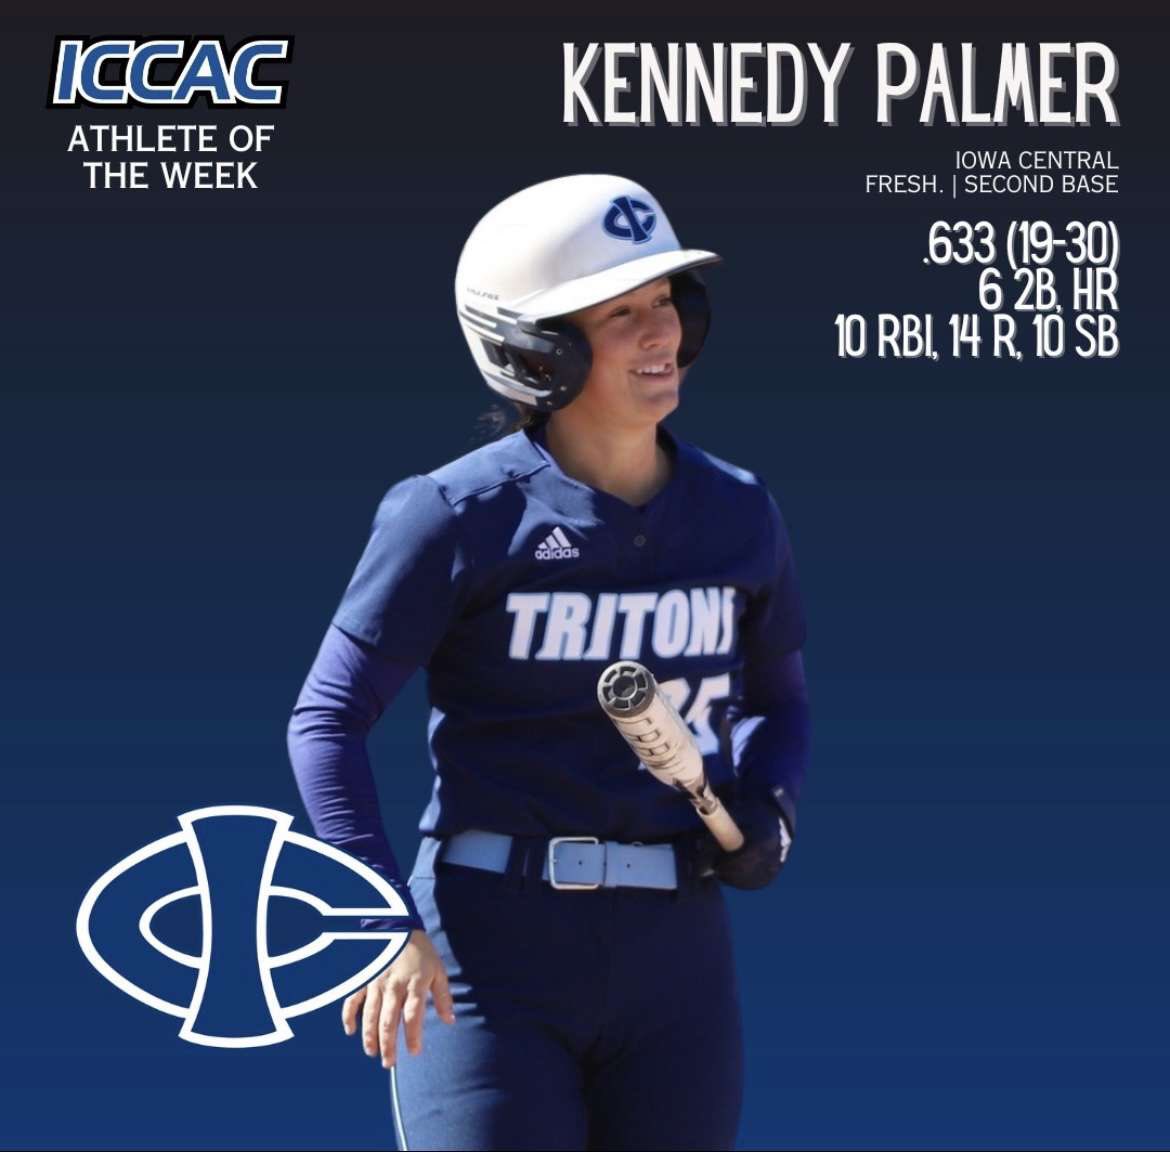 Congratulations 𝑲𝒆𝒏𝒏𝒆𝒅𝒚 𝑷𝒂𝒍𝒎𝒆𝒓 on her 3rd ICCAC ATHLETE OF THE WEEK award‼️Keep working Ken, we’re very proud of you‼️ #RTR #Tritonpride #tritonexcellence